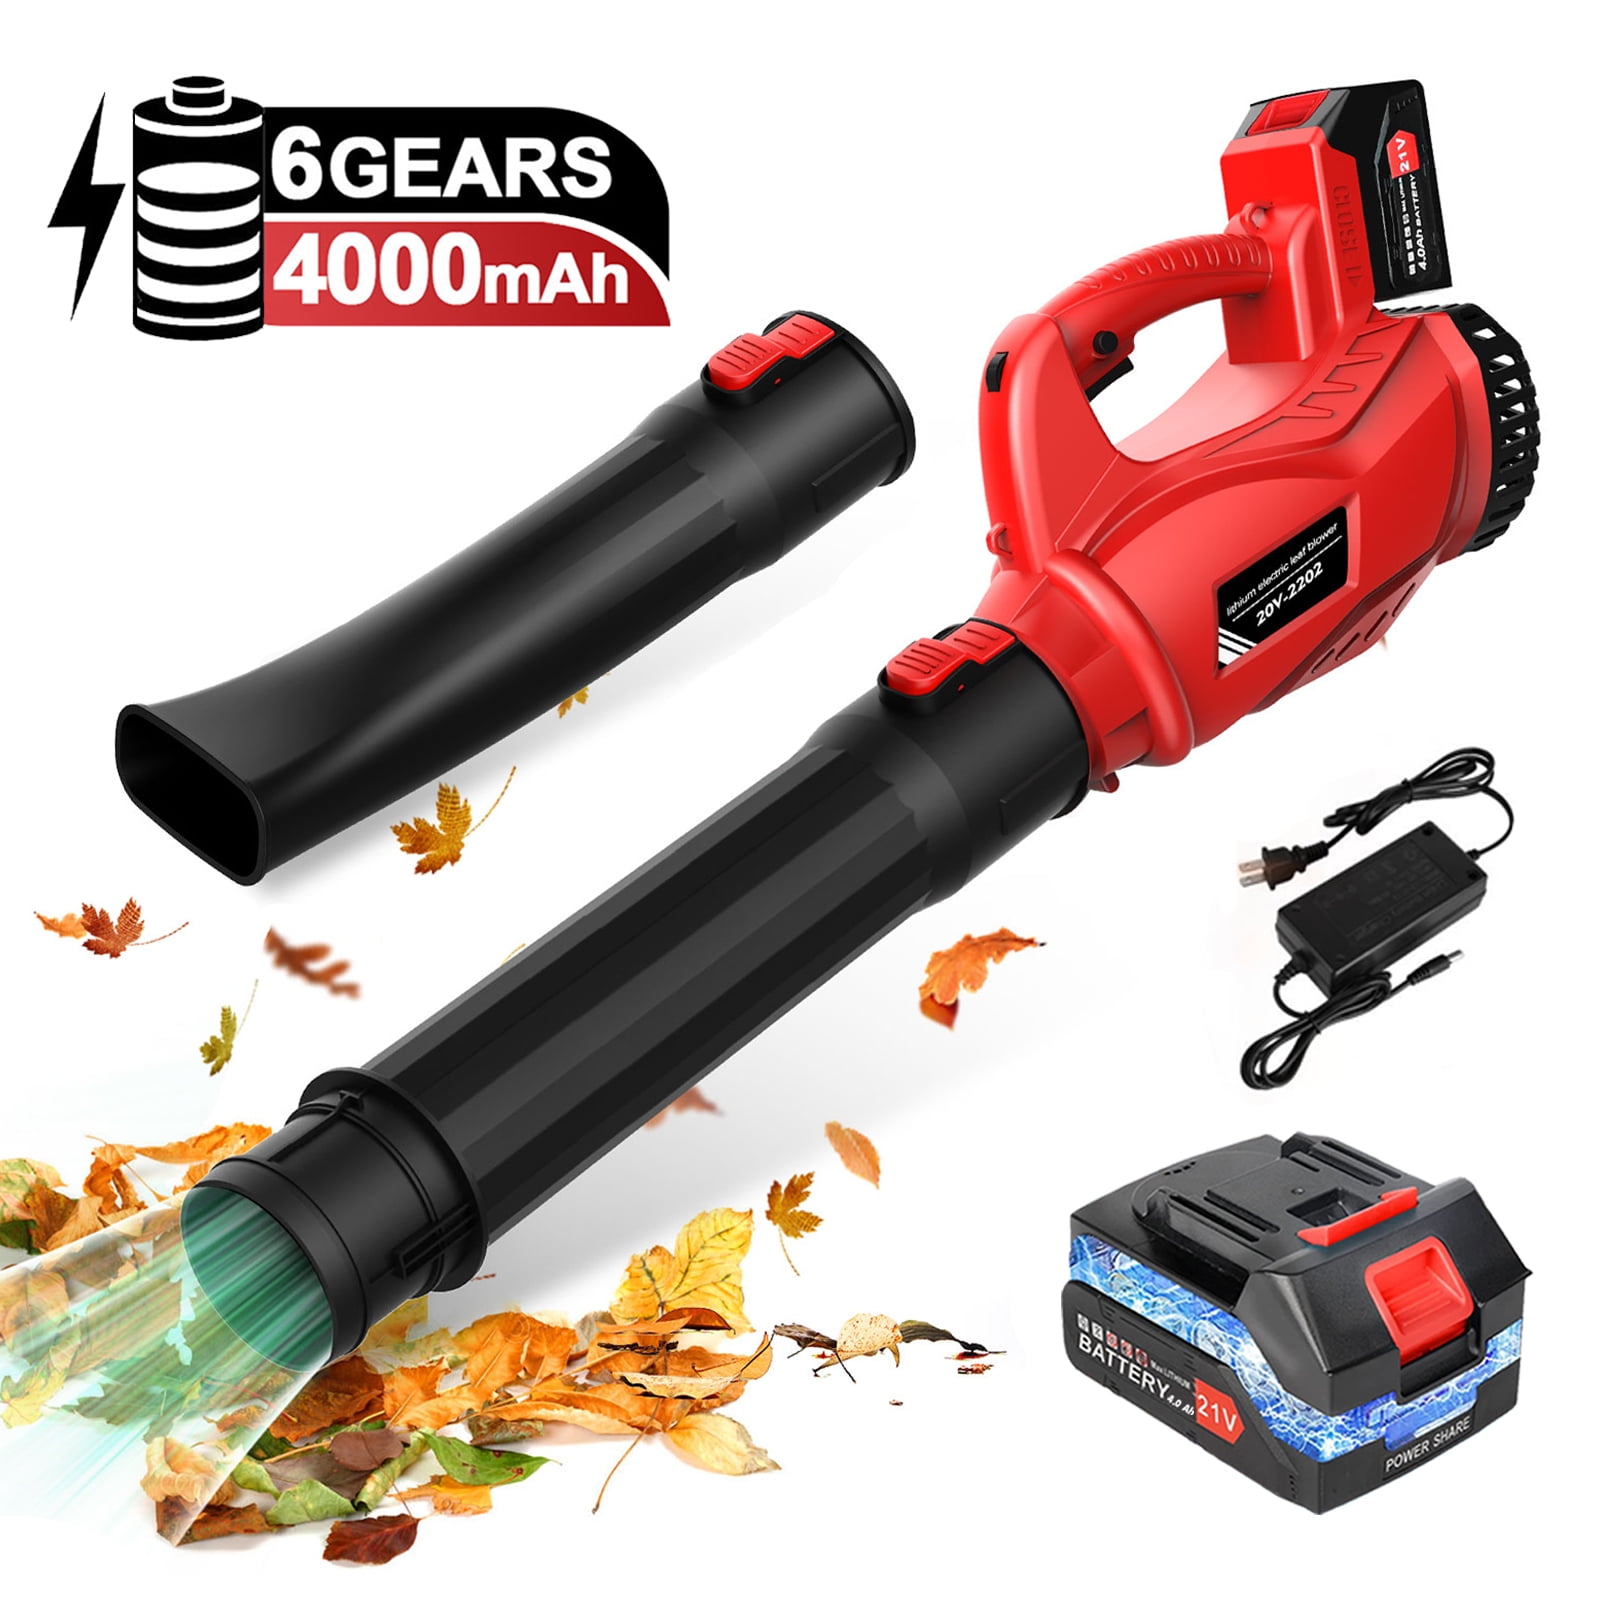  Ecomax 18V Electric Leaf Blower, Leaf Blower Cordless with 2Ah  Battery and Charger, Lightweight Blower Battery Powered for Lawn Care &  Snow Blowing & Yard Cleaning, ELG04, Black & Red 